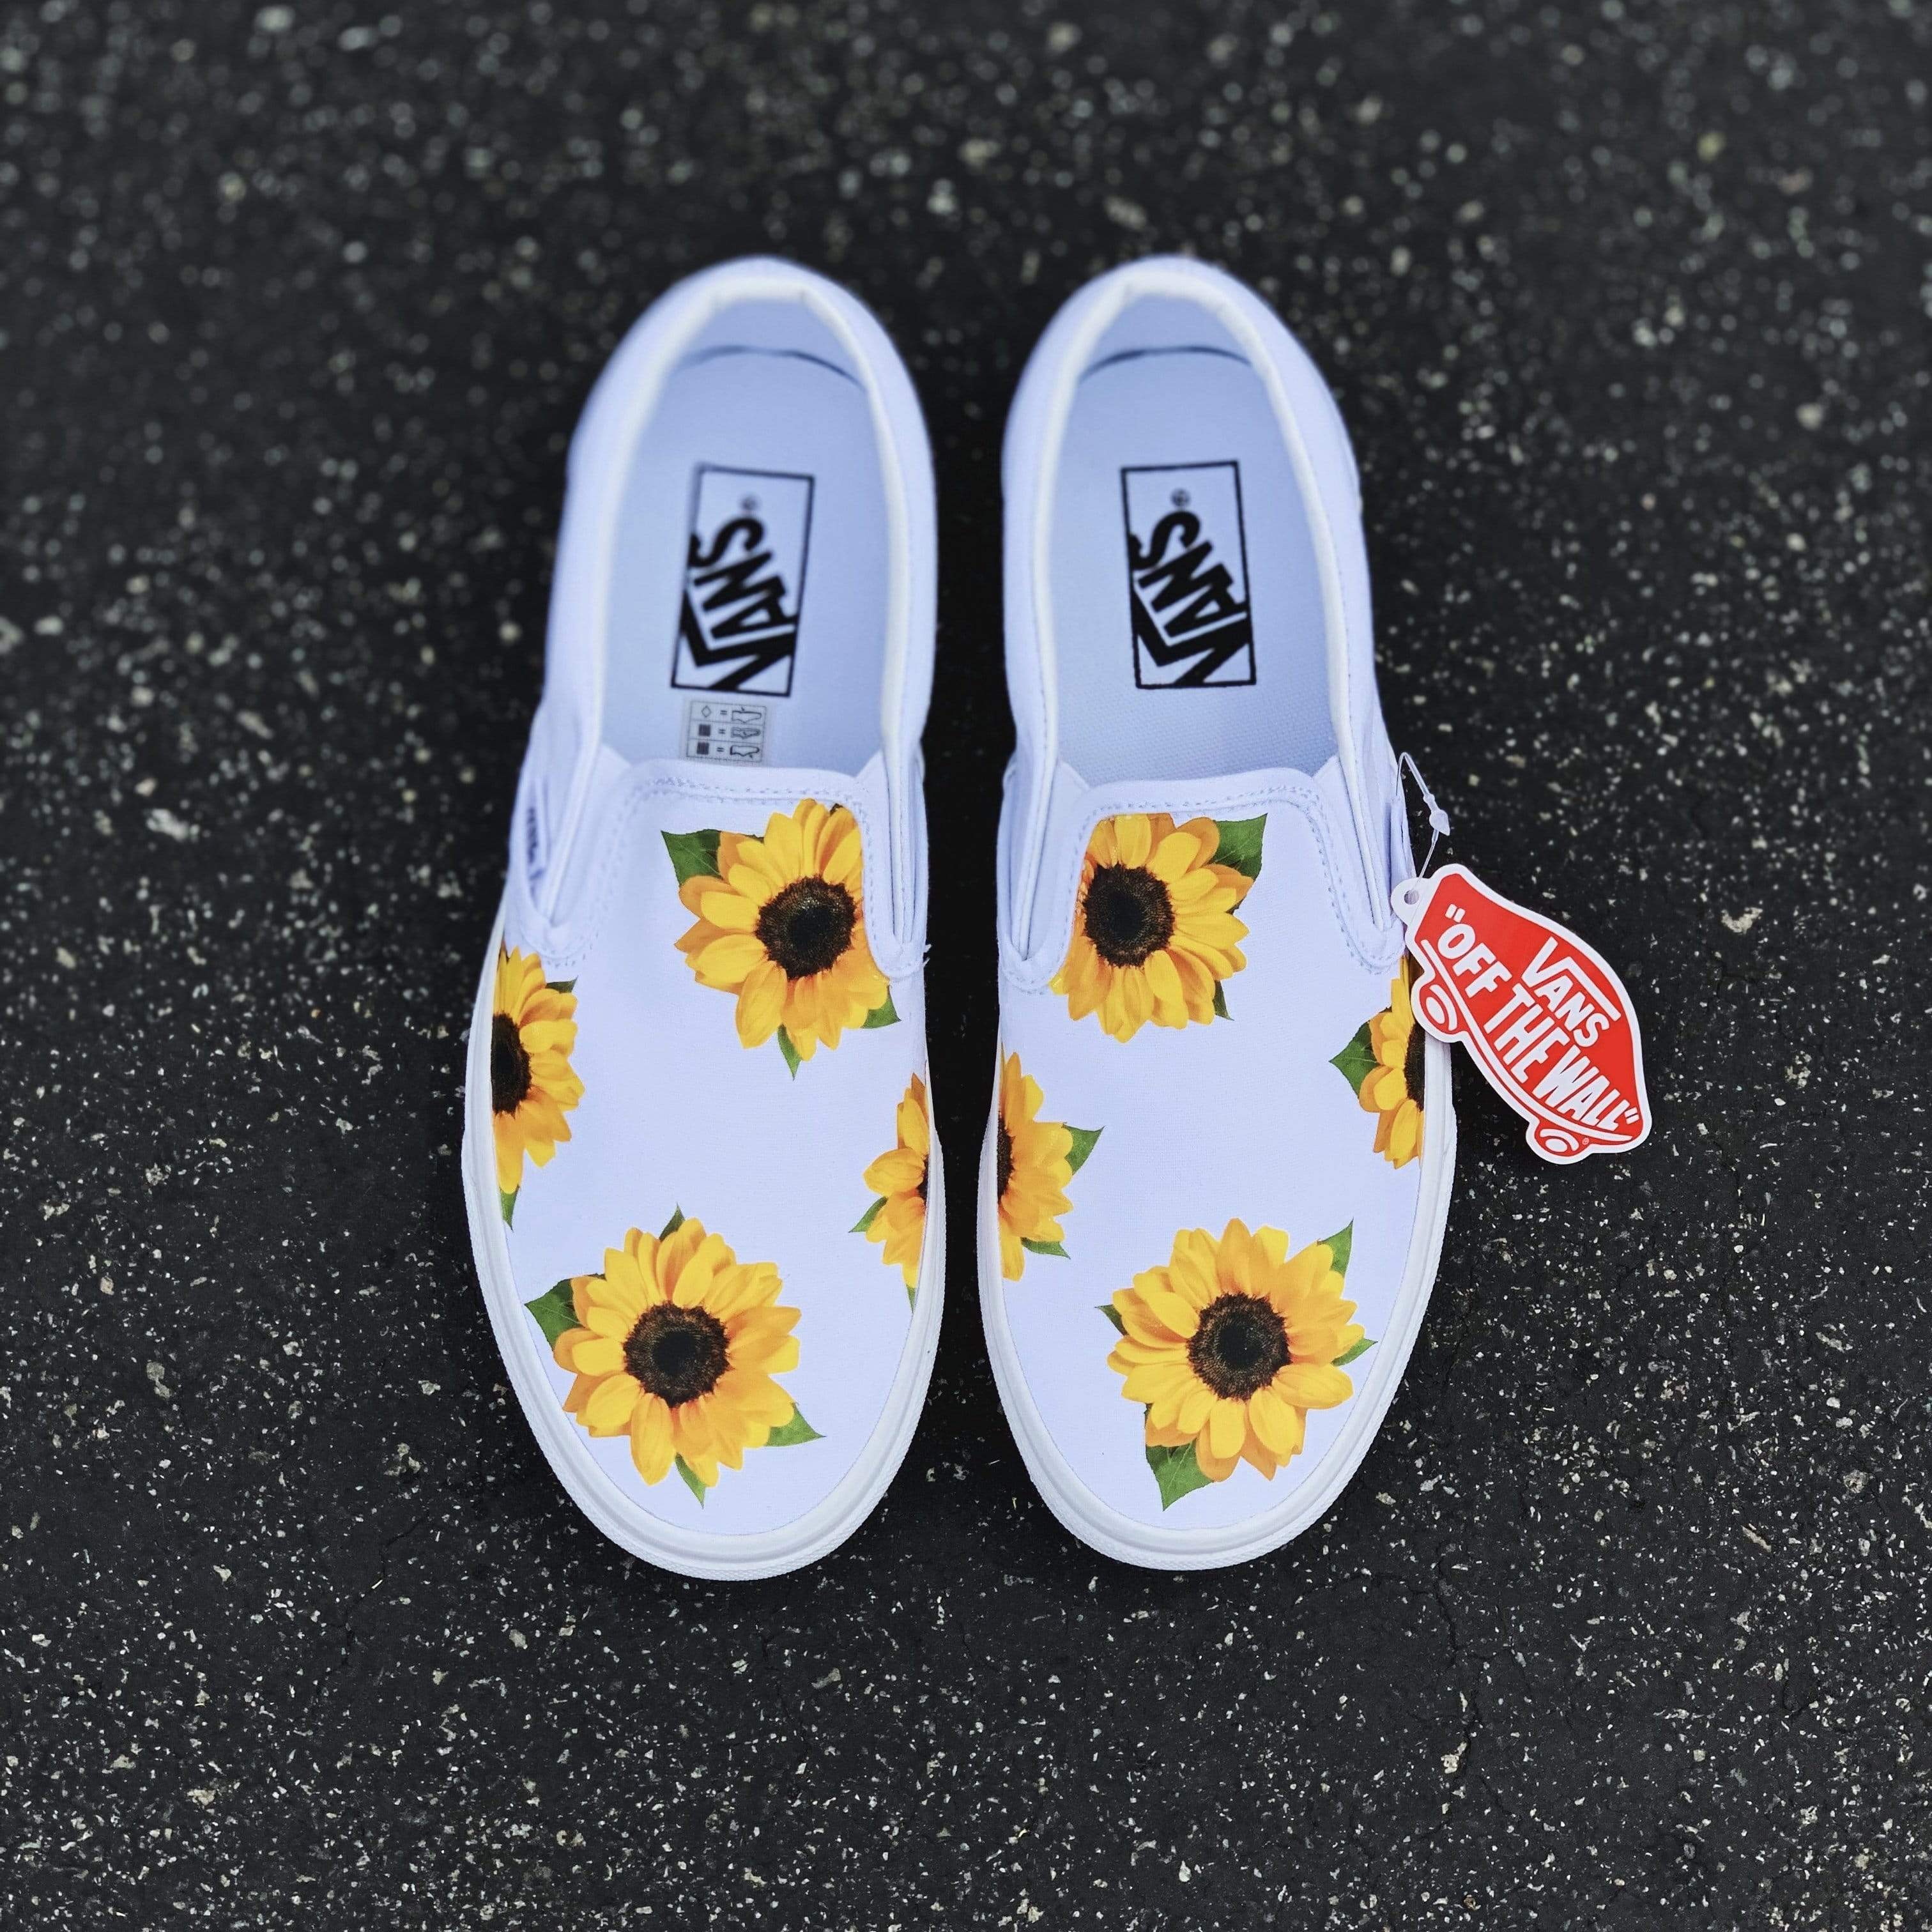 sunflowers on shoes